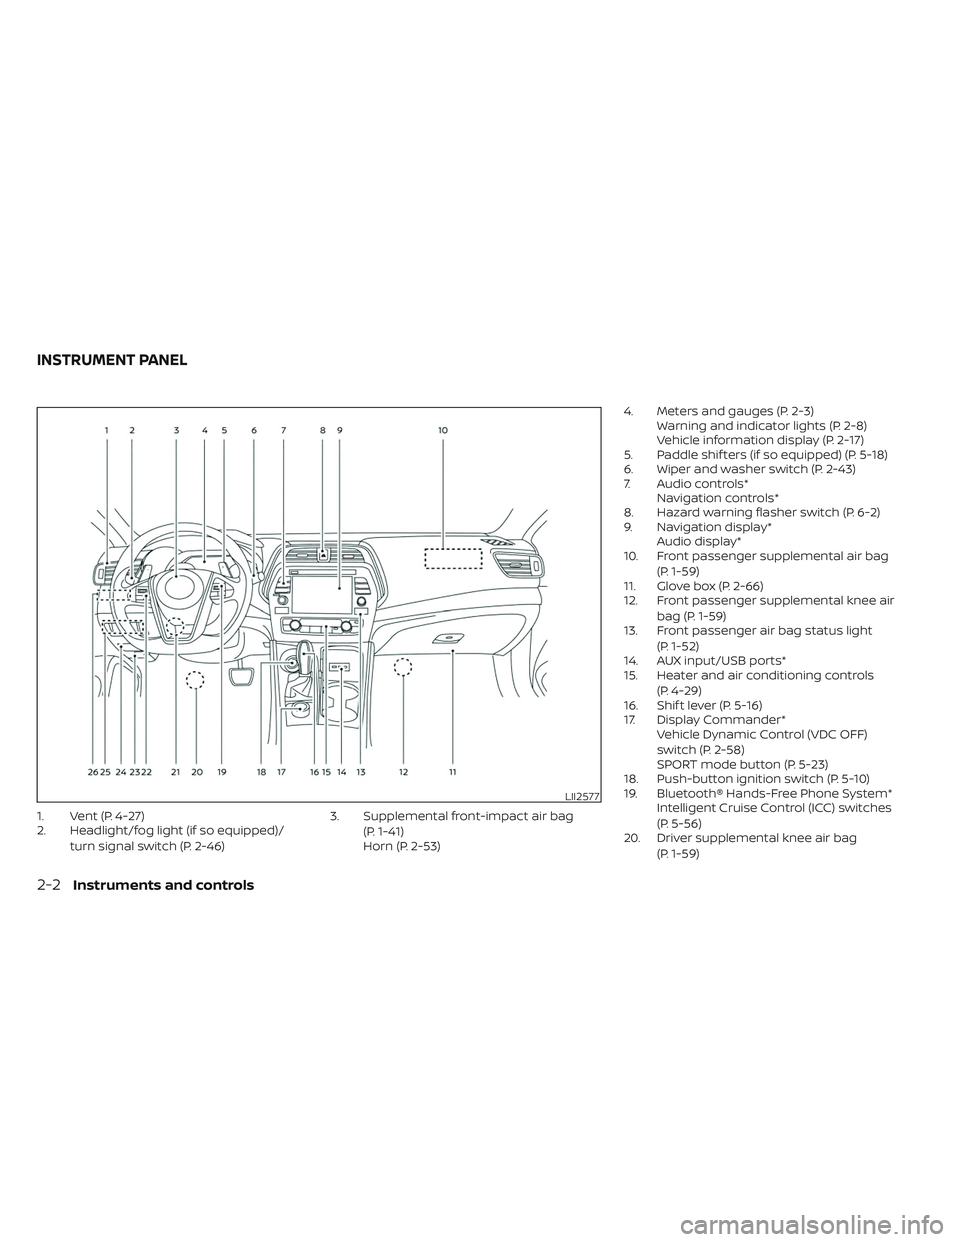 NISSAN MAXIMA 2023  Owners Manual 1. Vent (P. 4-27)
2. Headlight/fog light (if so equipped)/turn signal switch (P. 2-46) 3. Supplemental front-impact air bag
(P. 1-41)
Horn (P. 2-53) 4. Meters and gauges (P. 2-3)
Warning and indicator